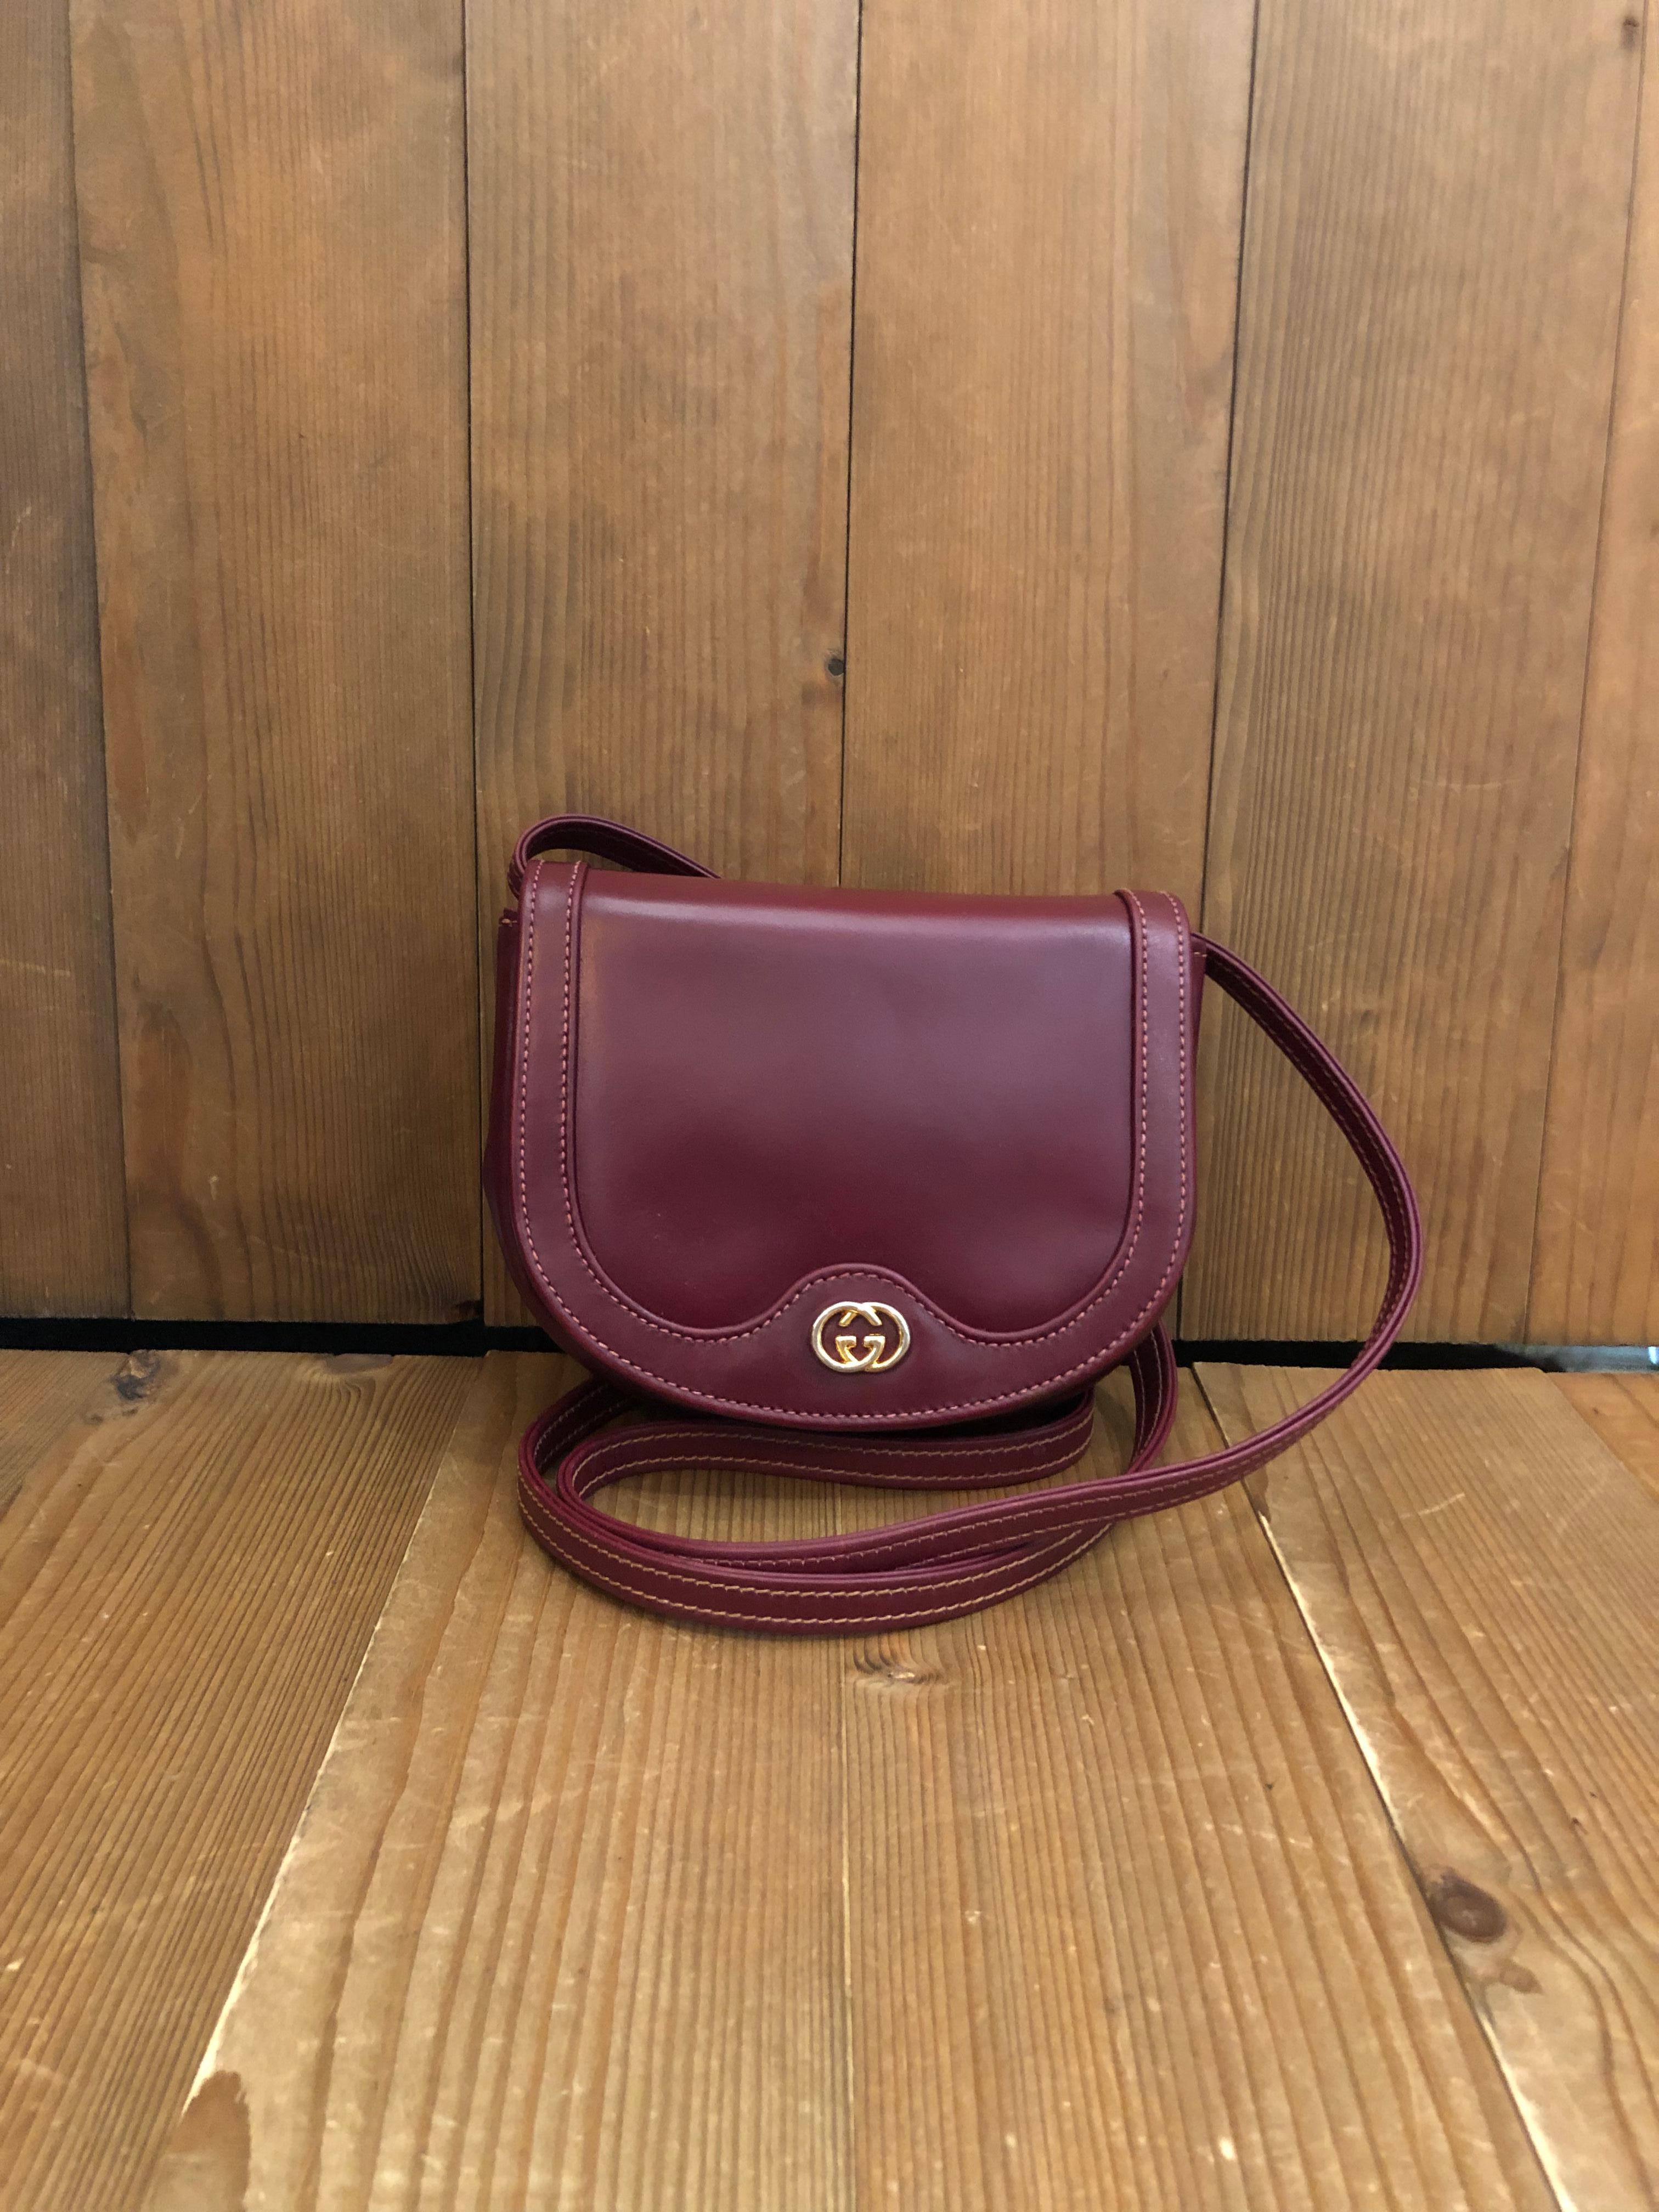 1970s GUCCI mini crossbody bag in burgundy leather. Made in Italy. Measures 6.5 x 5 x 1.25 inches Strap drop 22 inches. It’s mini in size yet fits plus-sized iPhone. Snap fastening closure. Comes with dustbag.

Condition - Minor signs of wear.